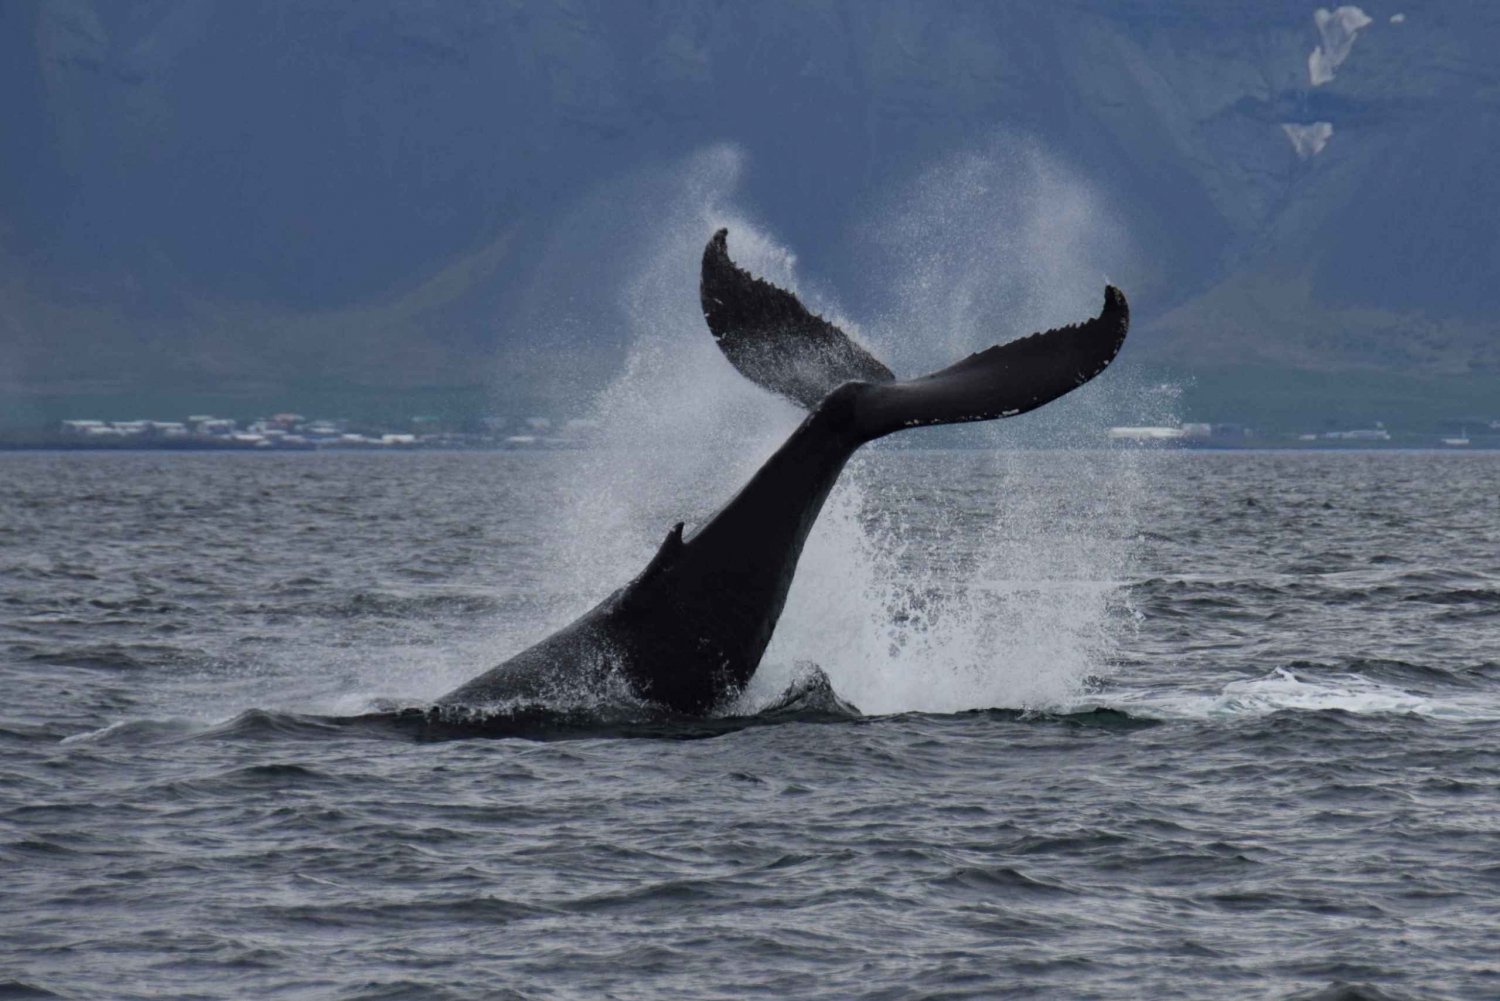 From Reykjavik: Whale Watching Tour by Fast Catamaran